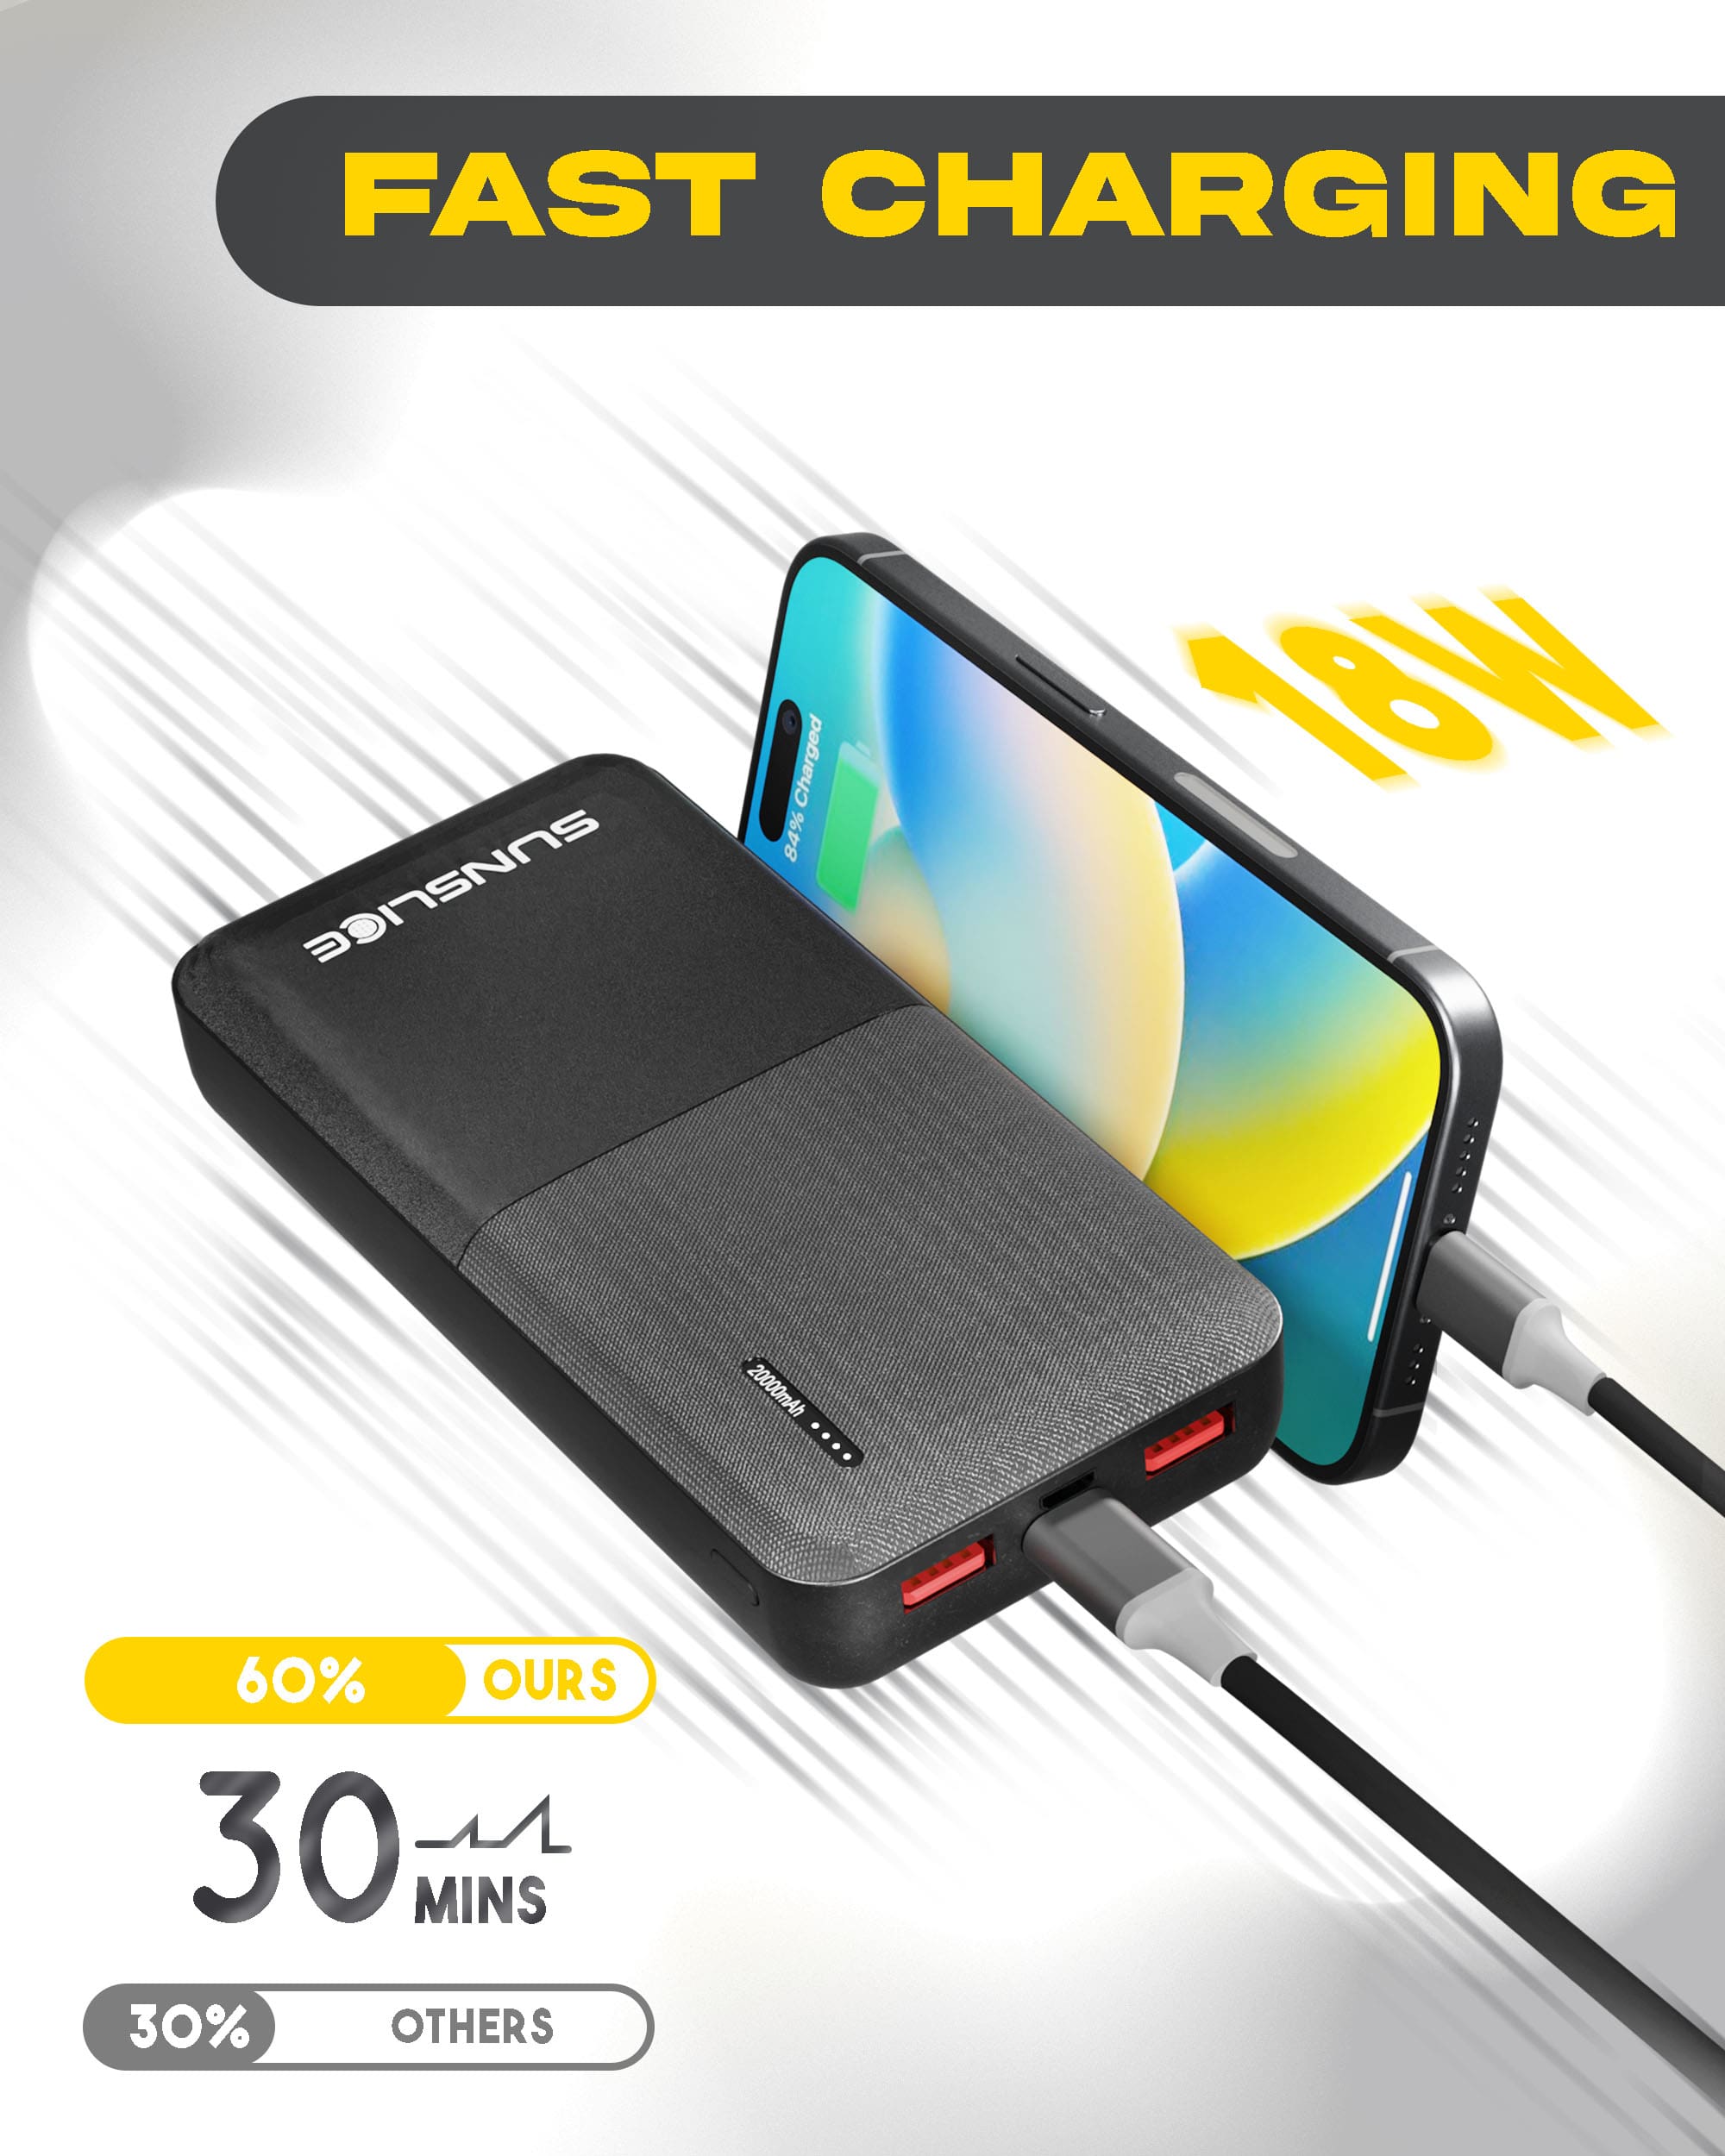 The Gravity 20 power bank 20000mah fast charging a smartphone 